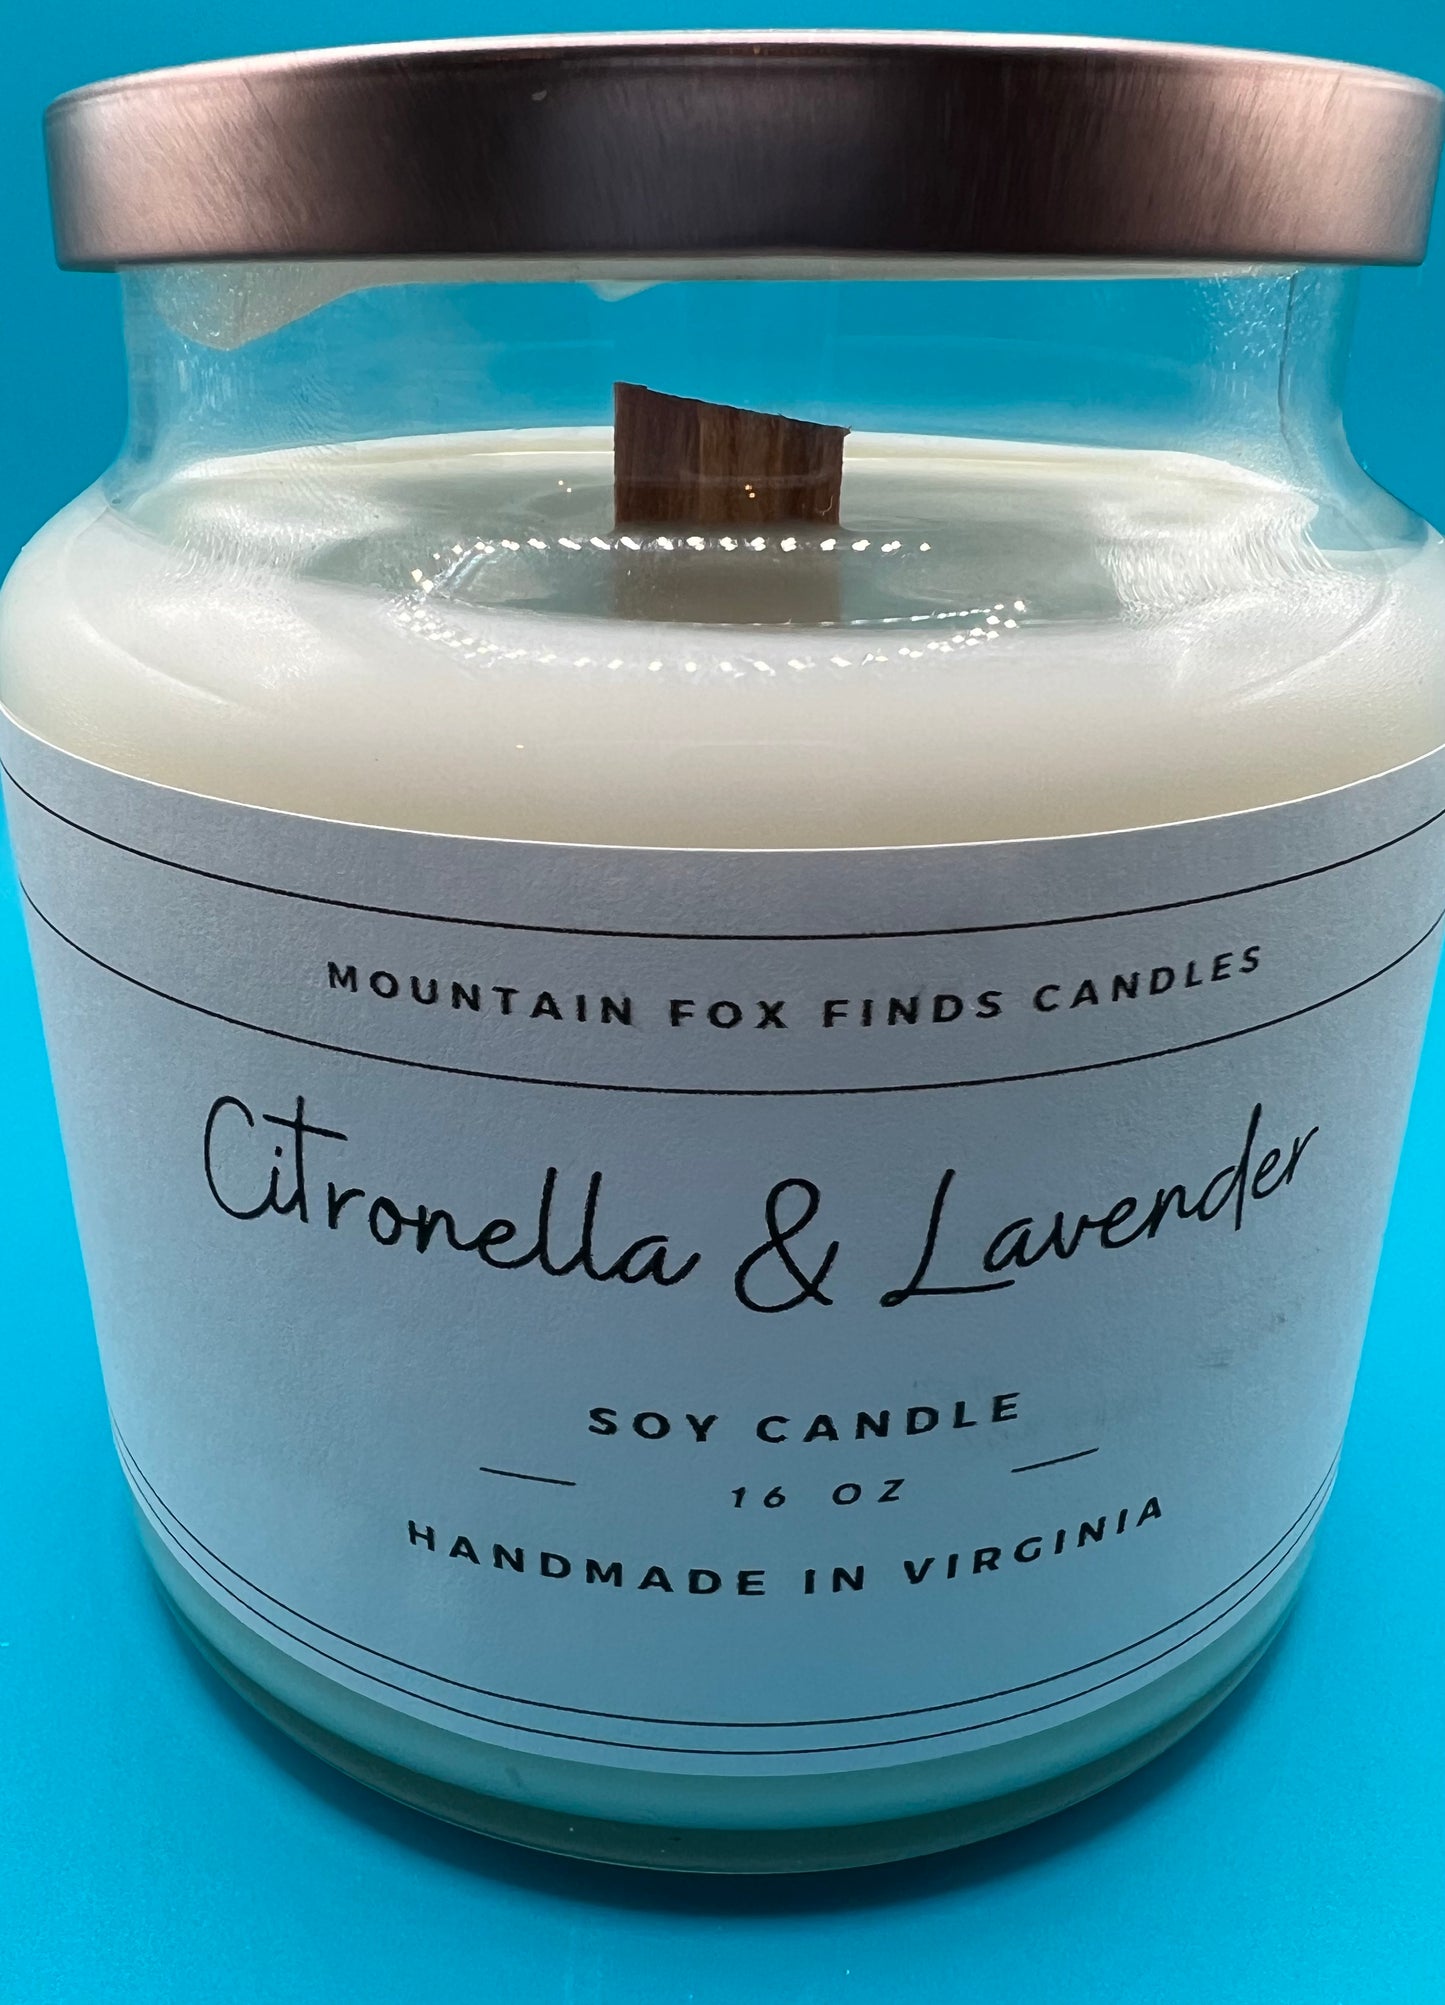 Citronella and Lavender Apothecary Jar Soy Wax Candle Close Side